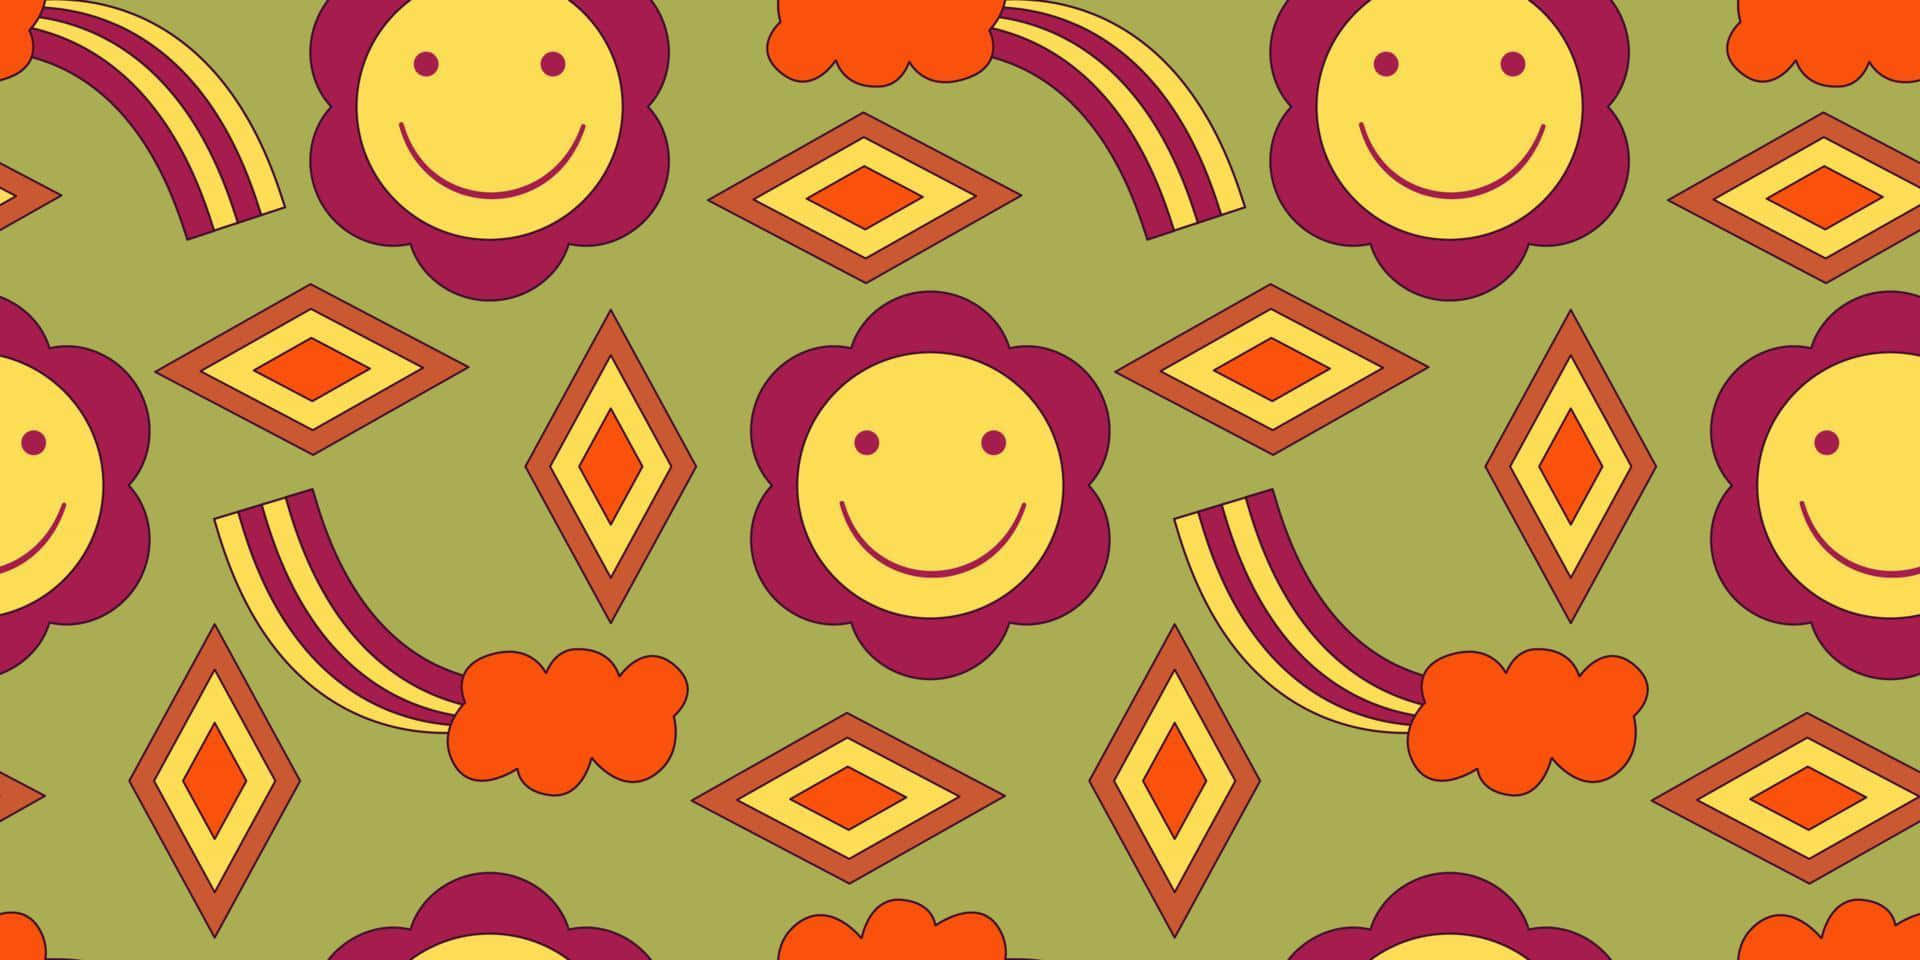 A Colorful Pattern With Smiling Faces And Flowers